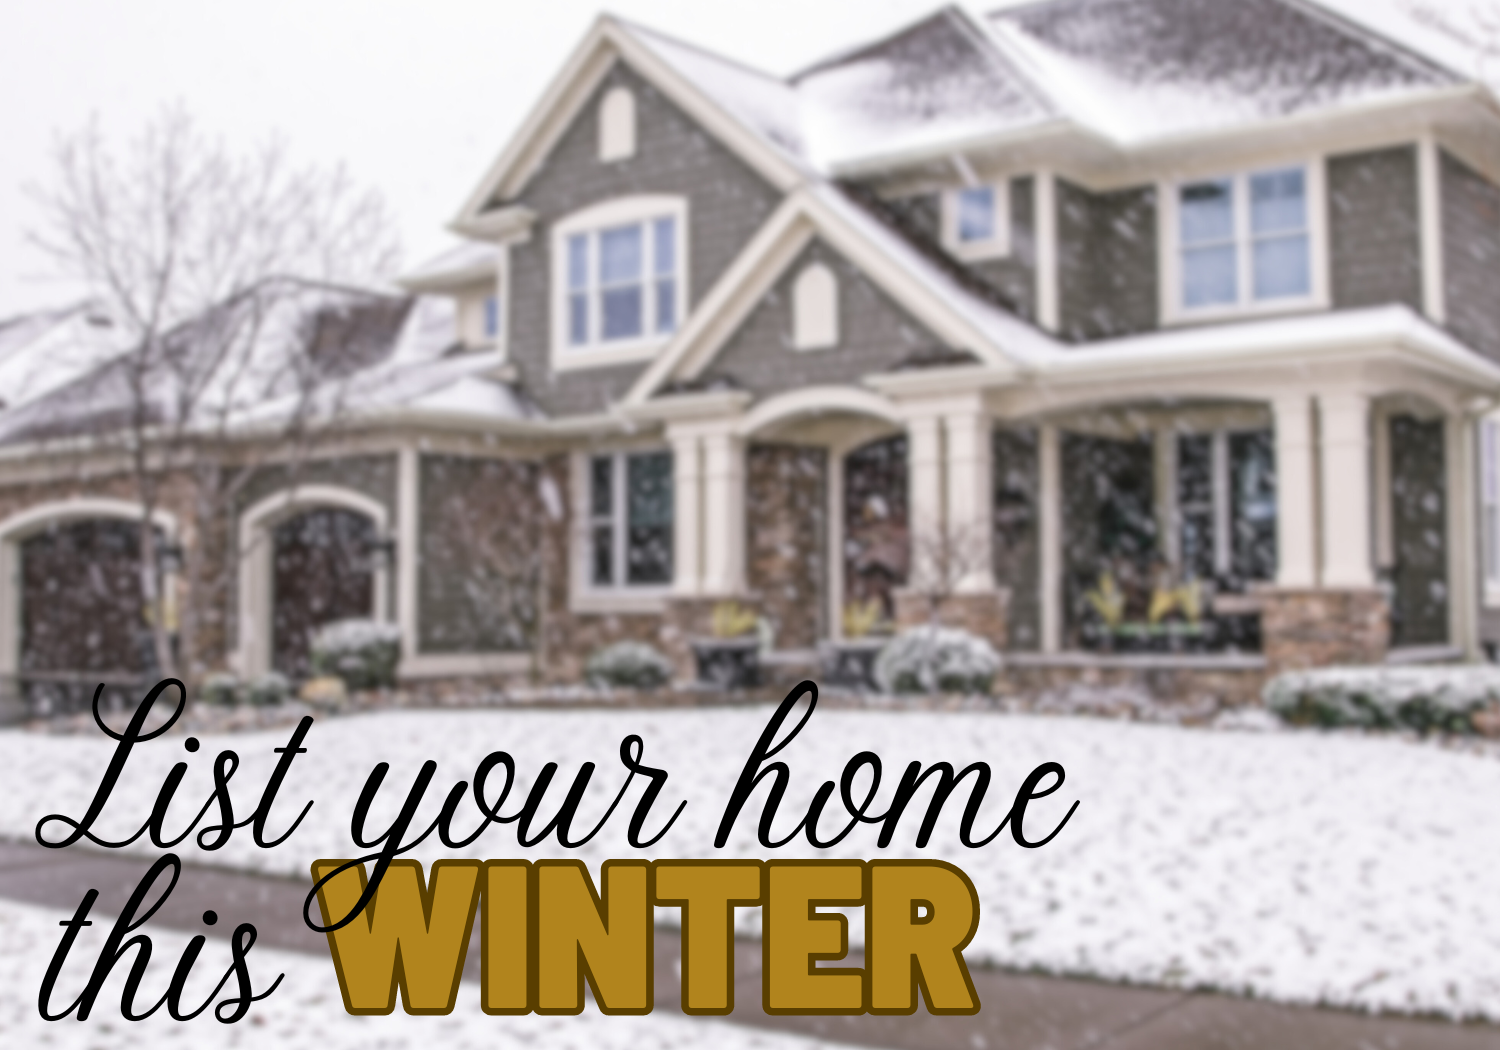 Selling In Winter Attracts Serious Buyers